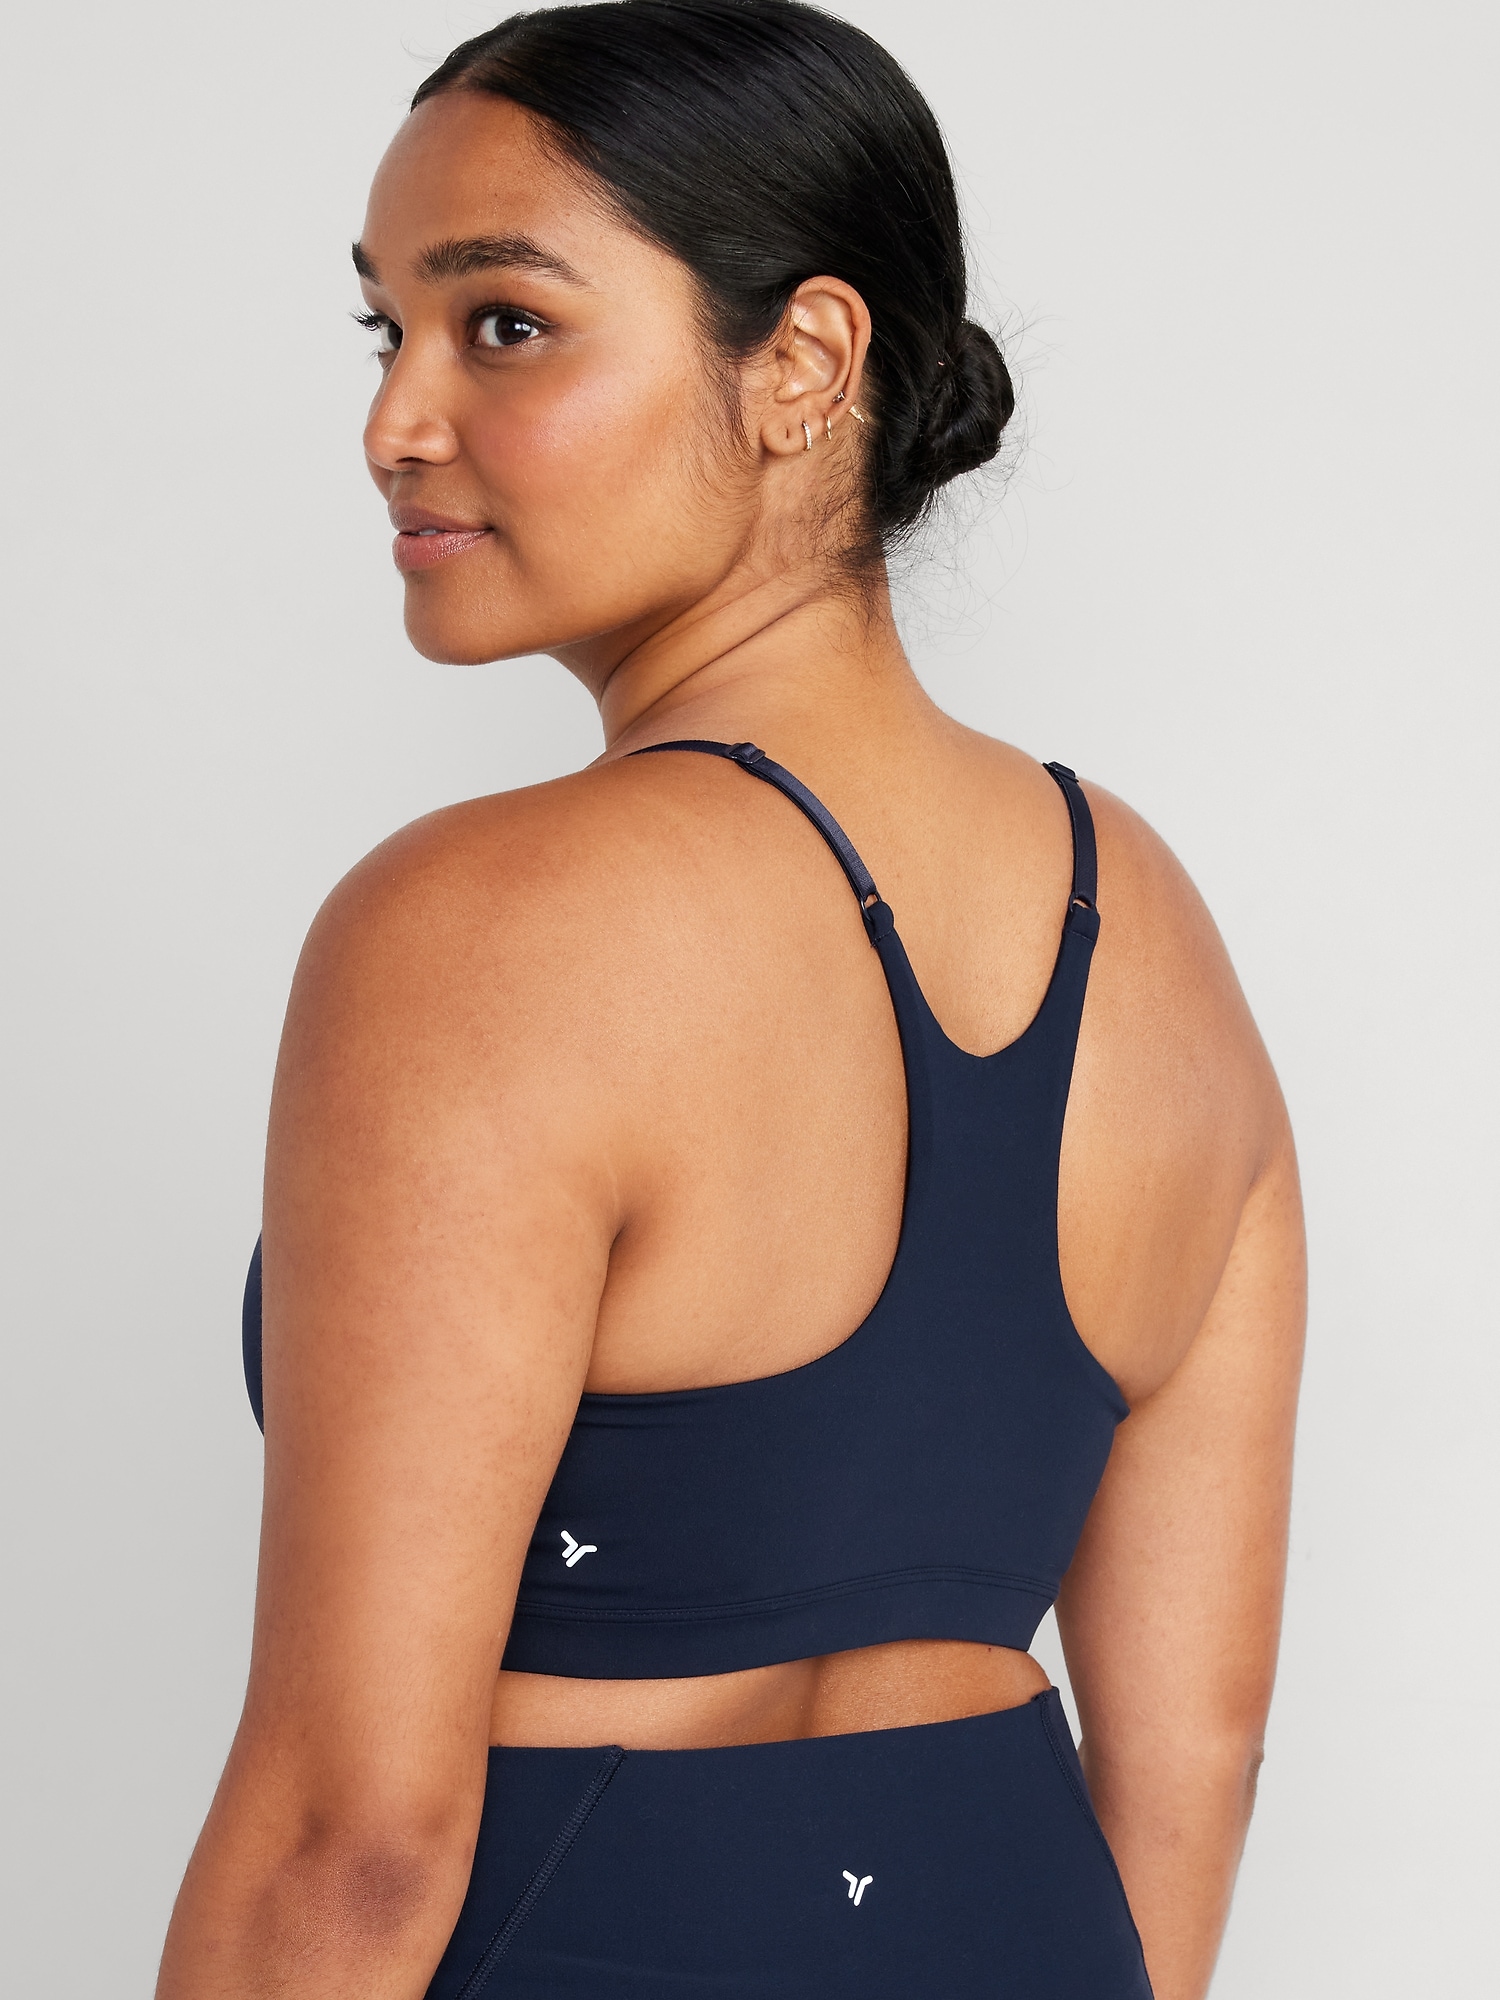 JUST-DRY Navy Blue High Impact Hit Compression Sports Bra for